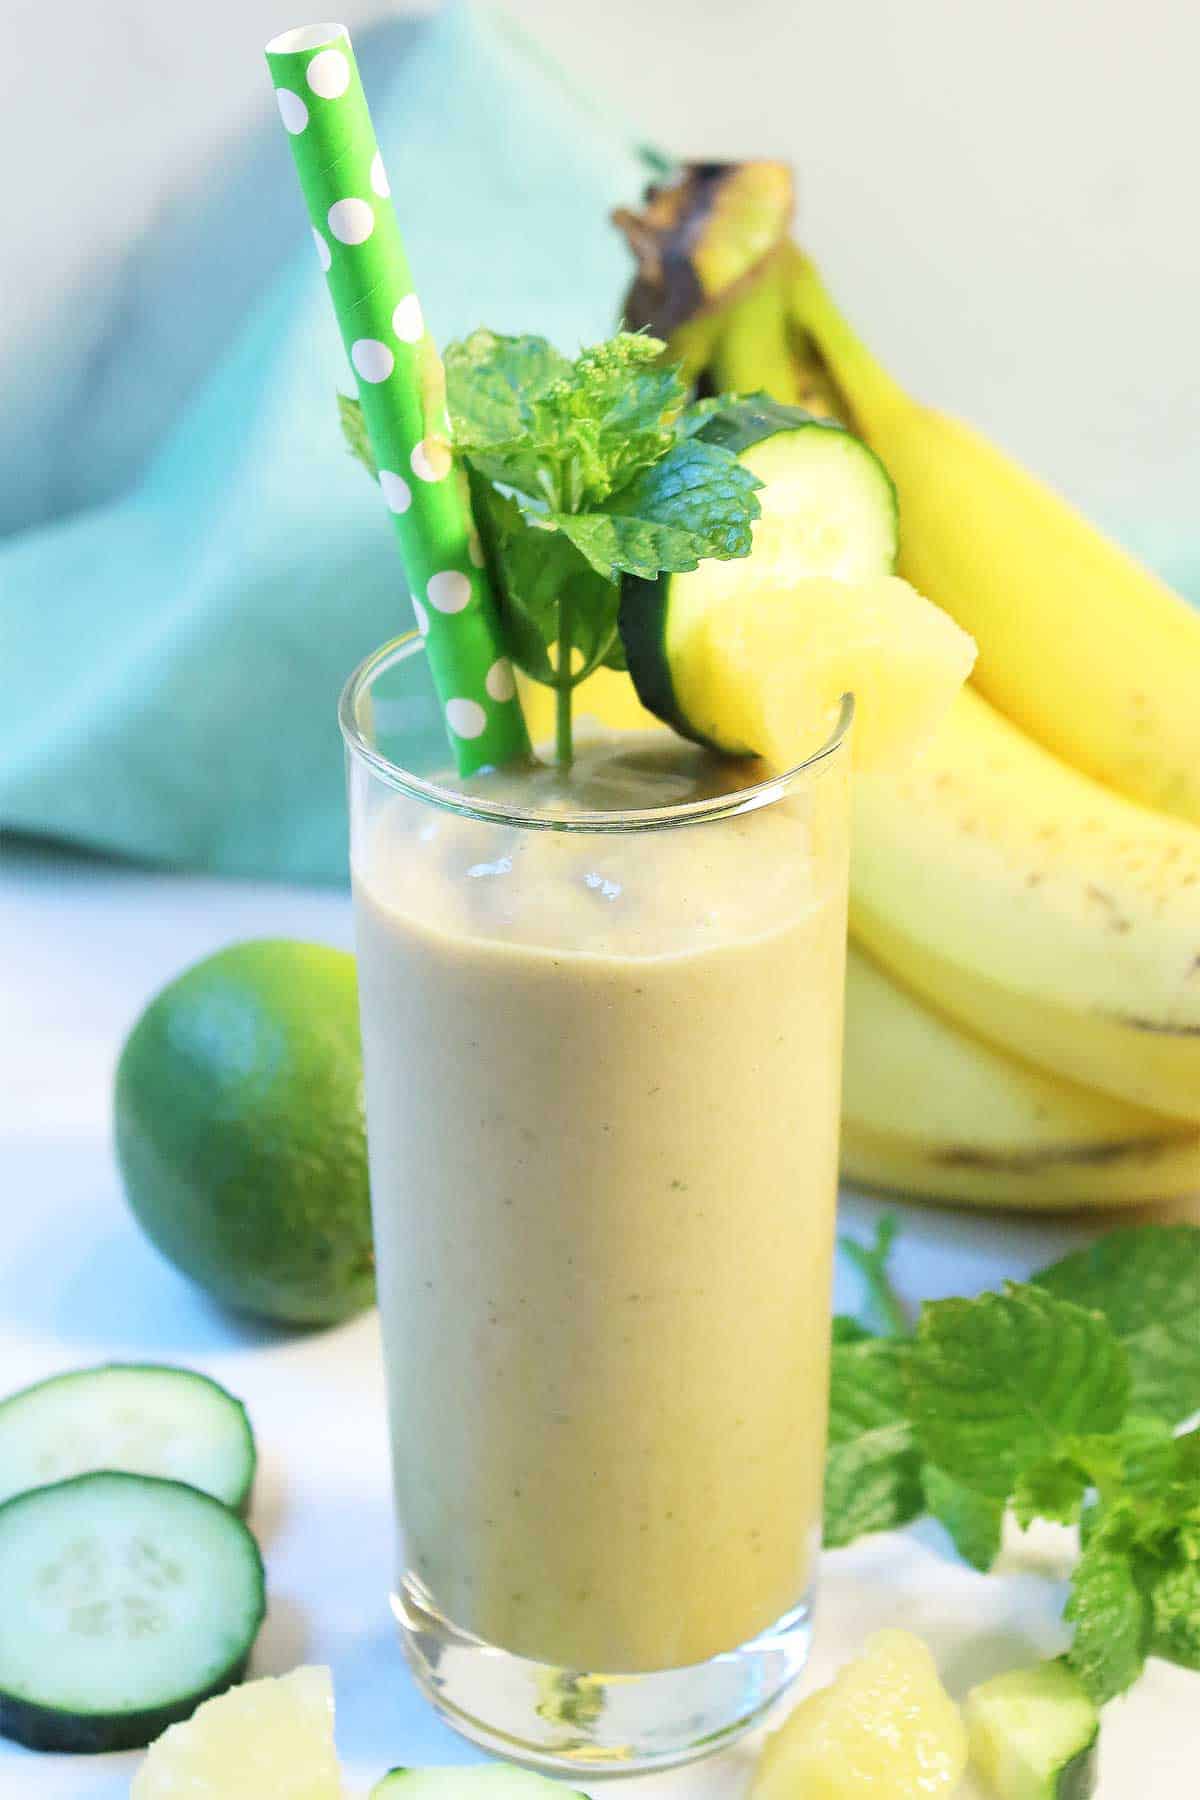 Banana Pineapple Smoothie with cucumber, pineapple and bananas around it.